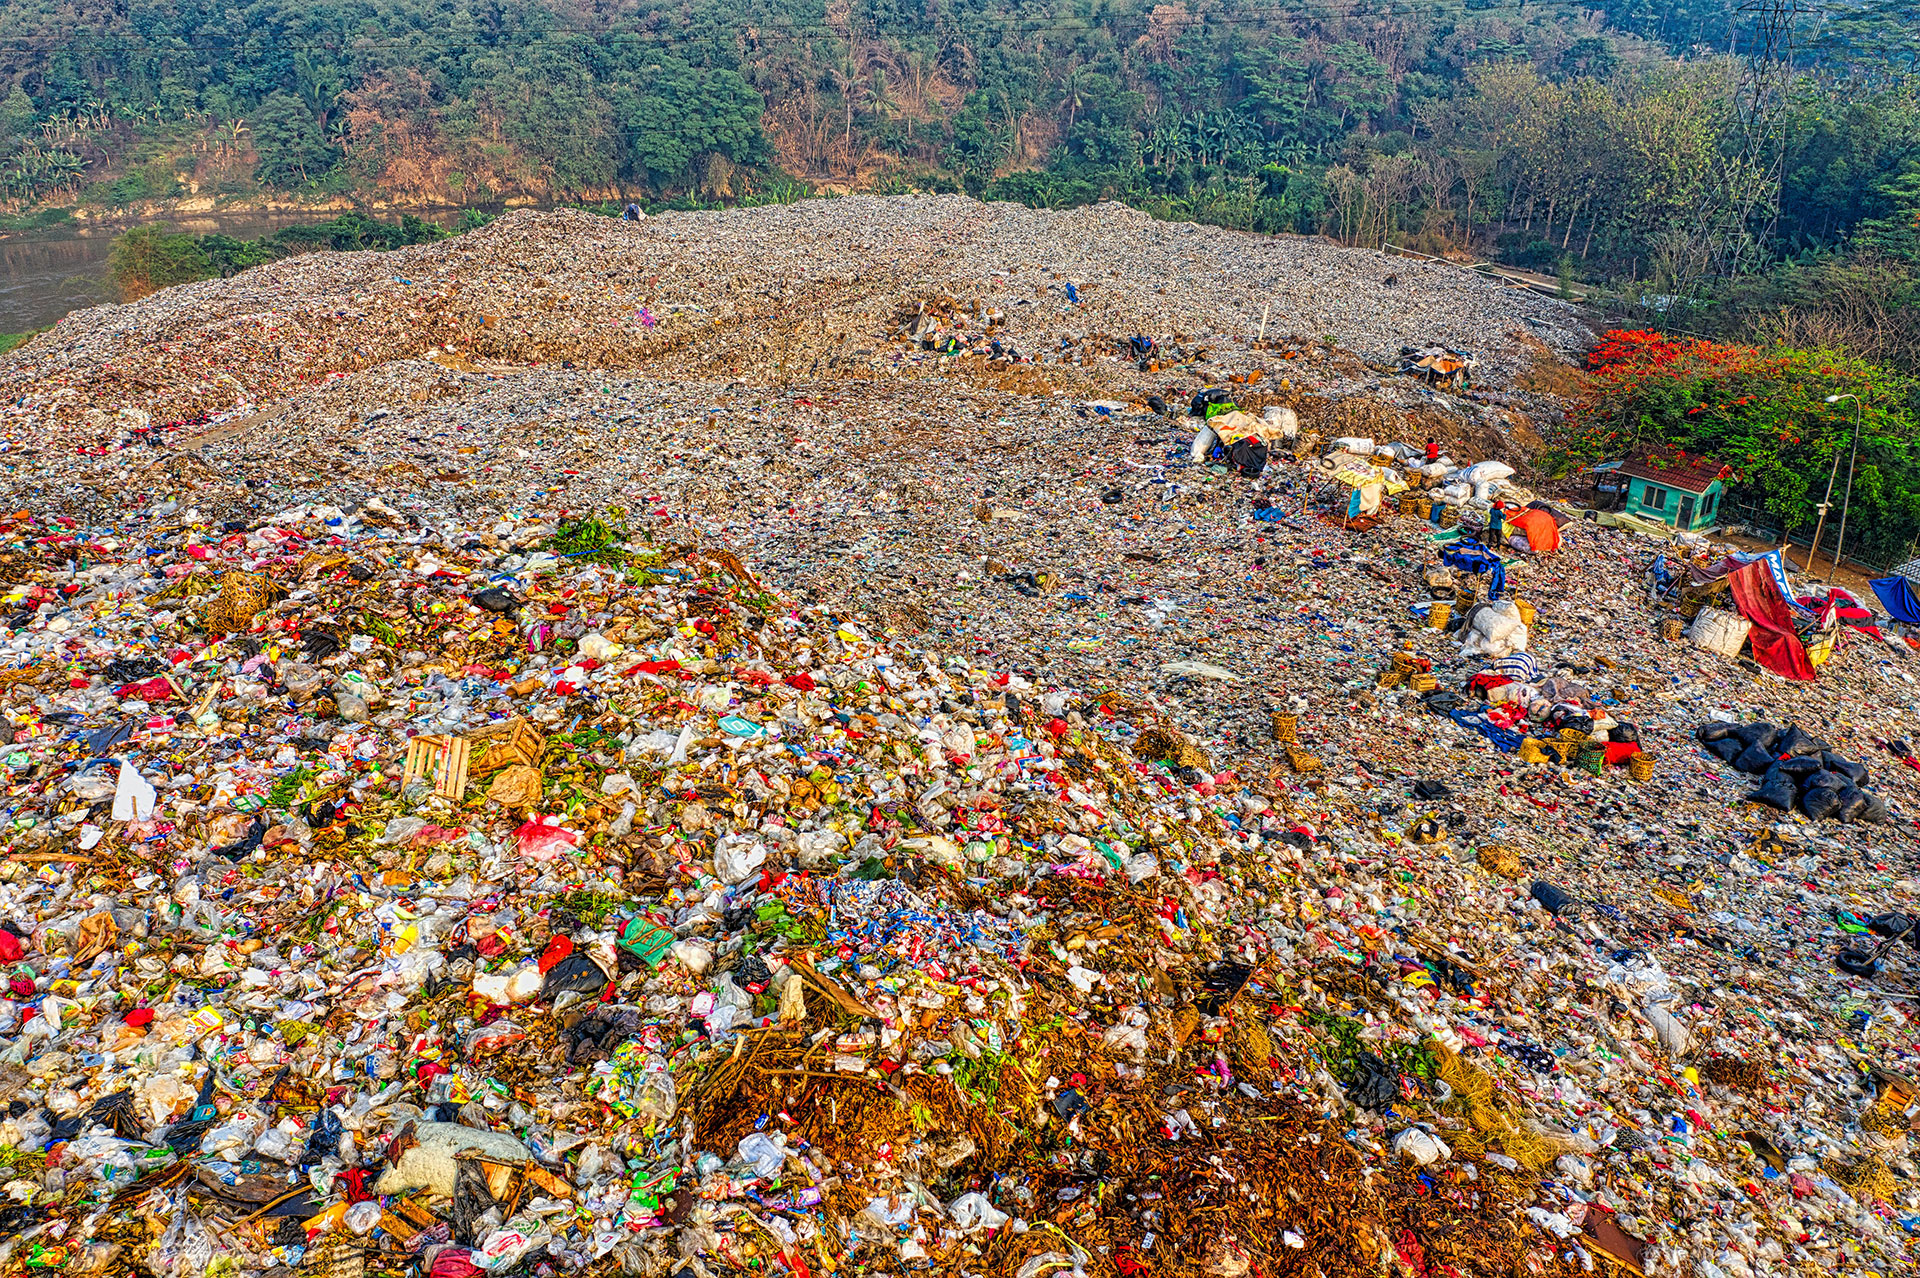 An image of a landfill spreading very far. Towards the bottom of the mountain of trash is a small green house and further behind that is a jungle forest.